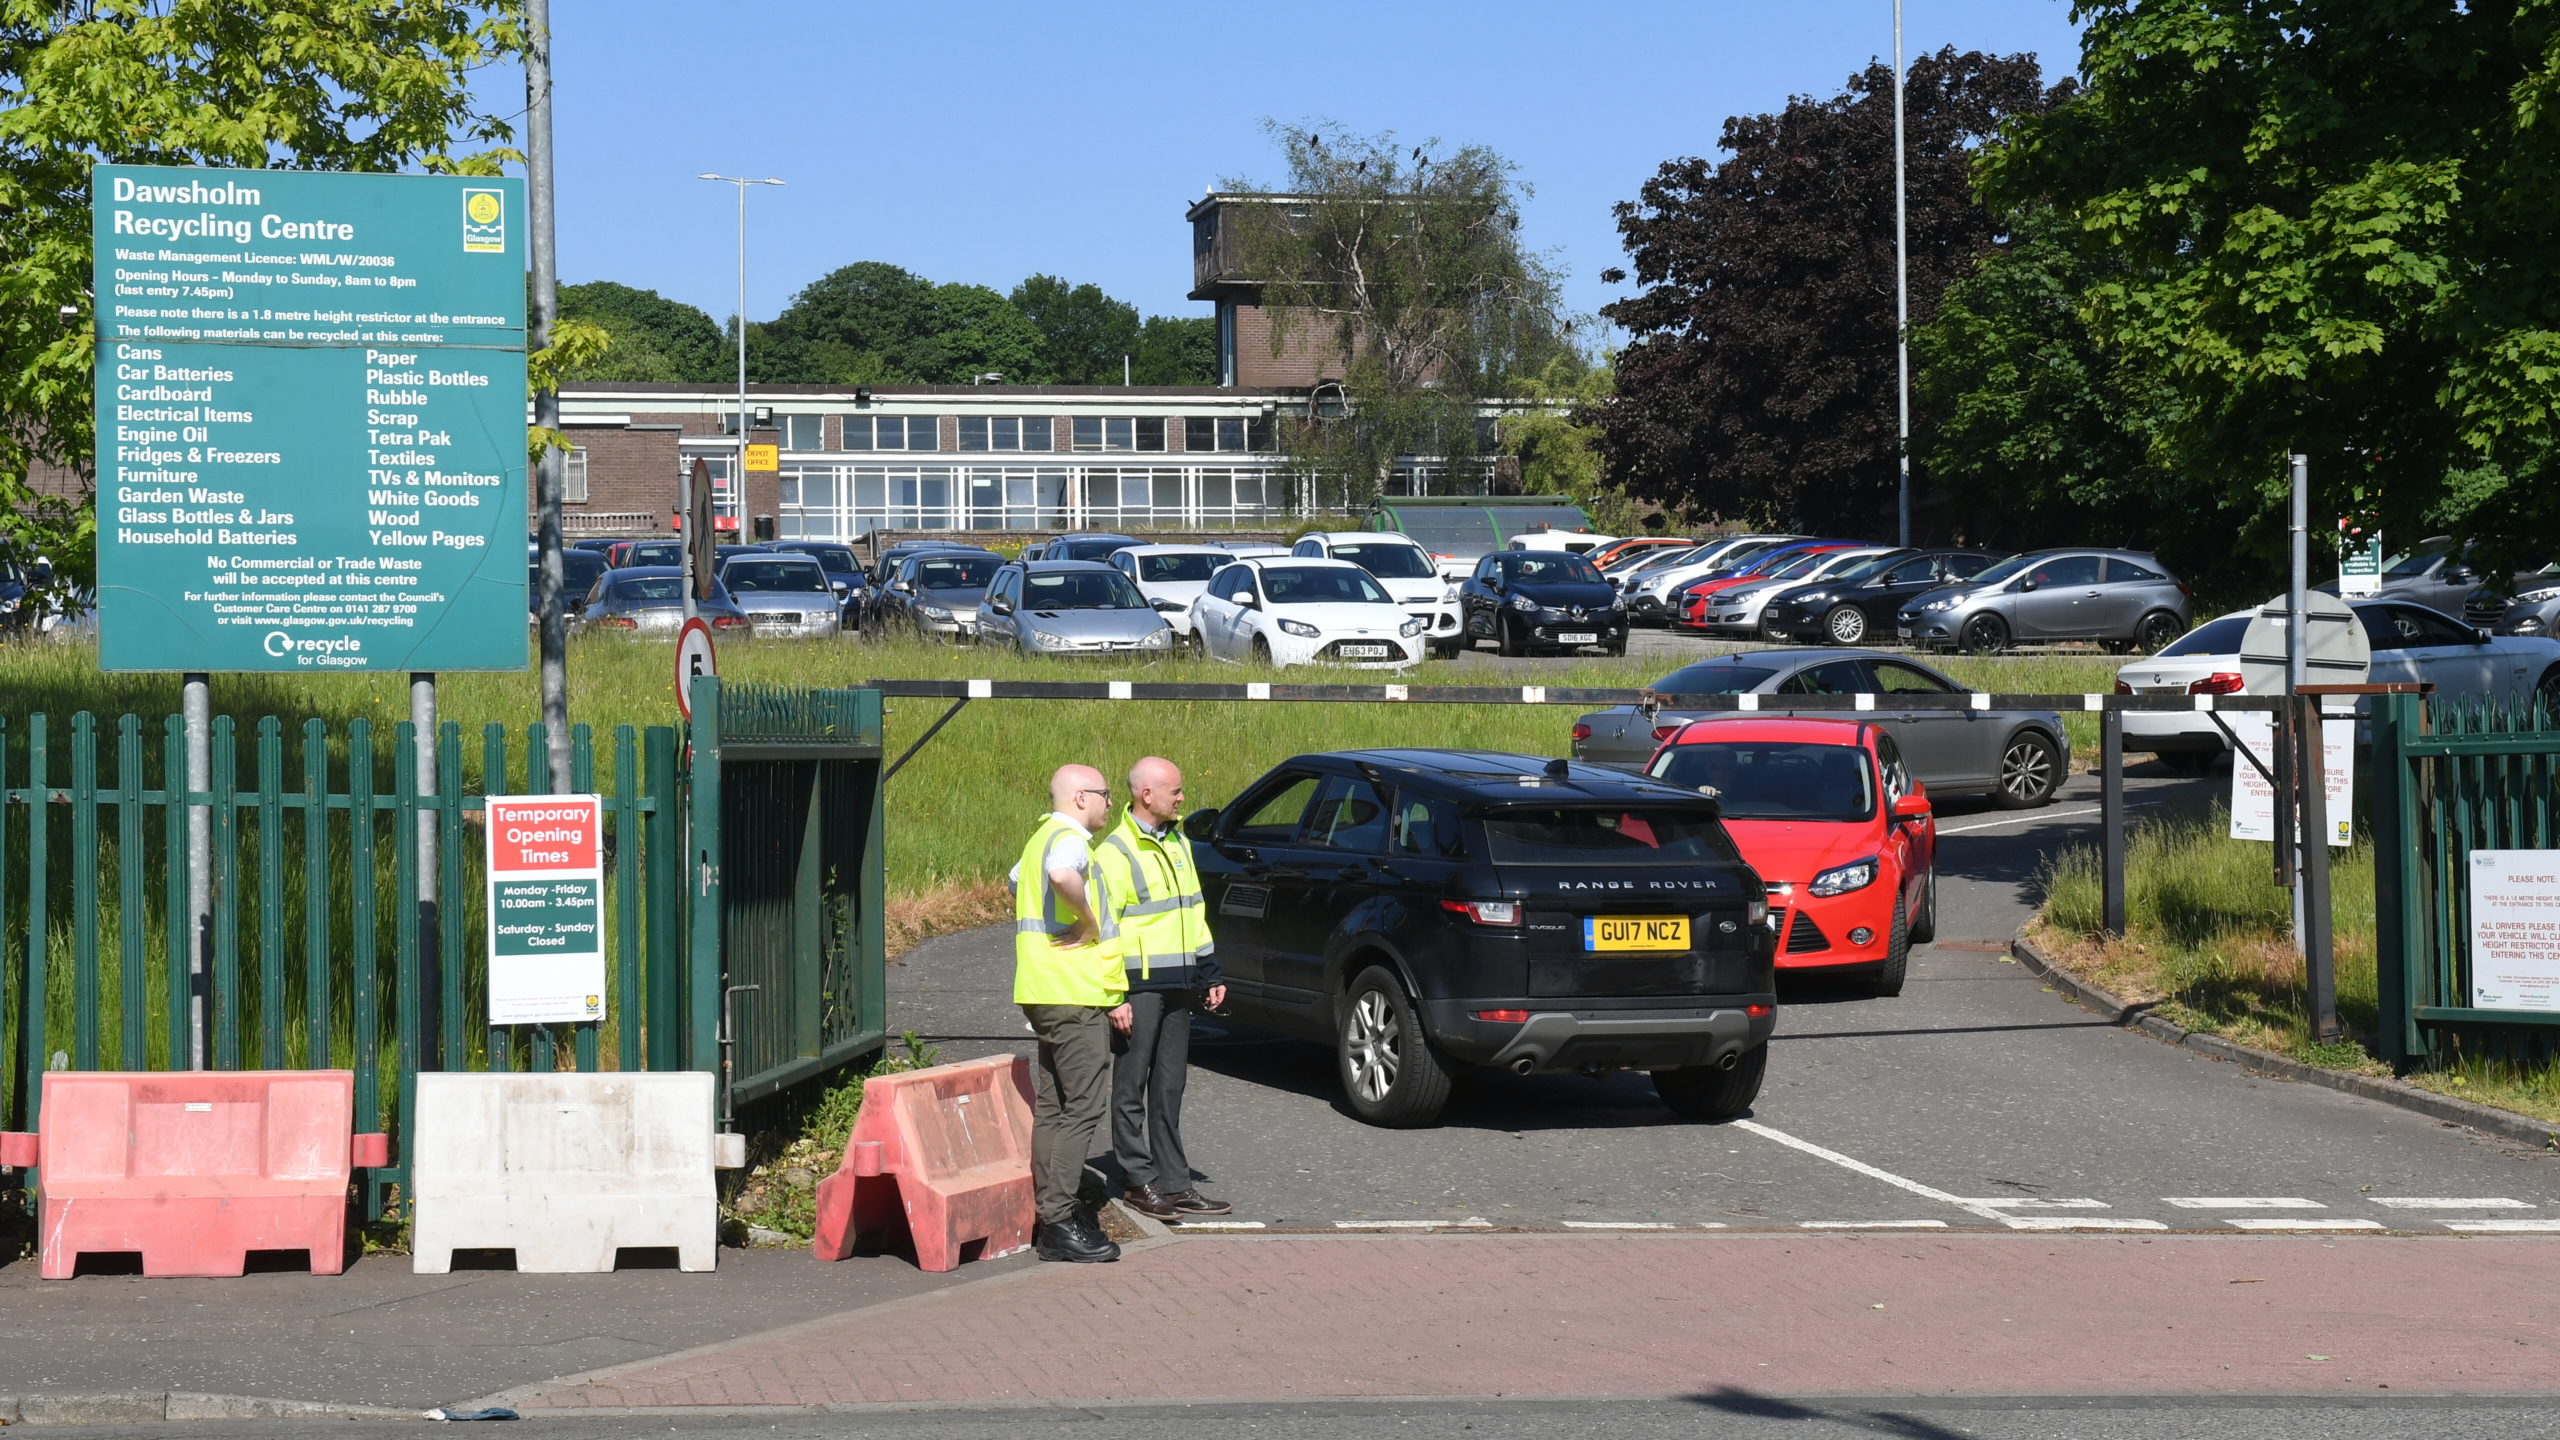 Cars entering Dawsholm Recycling Centre in Glasgow.